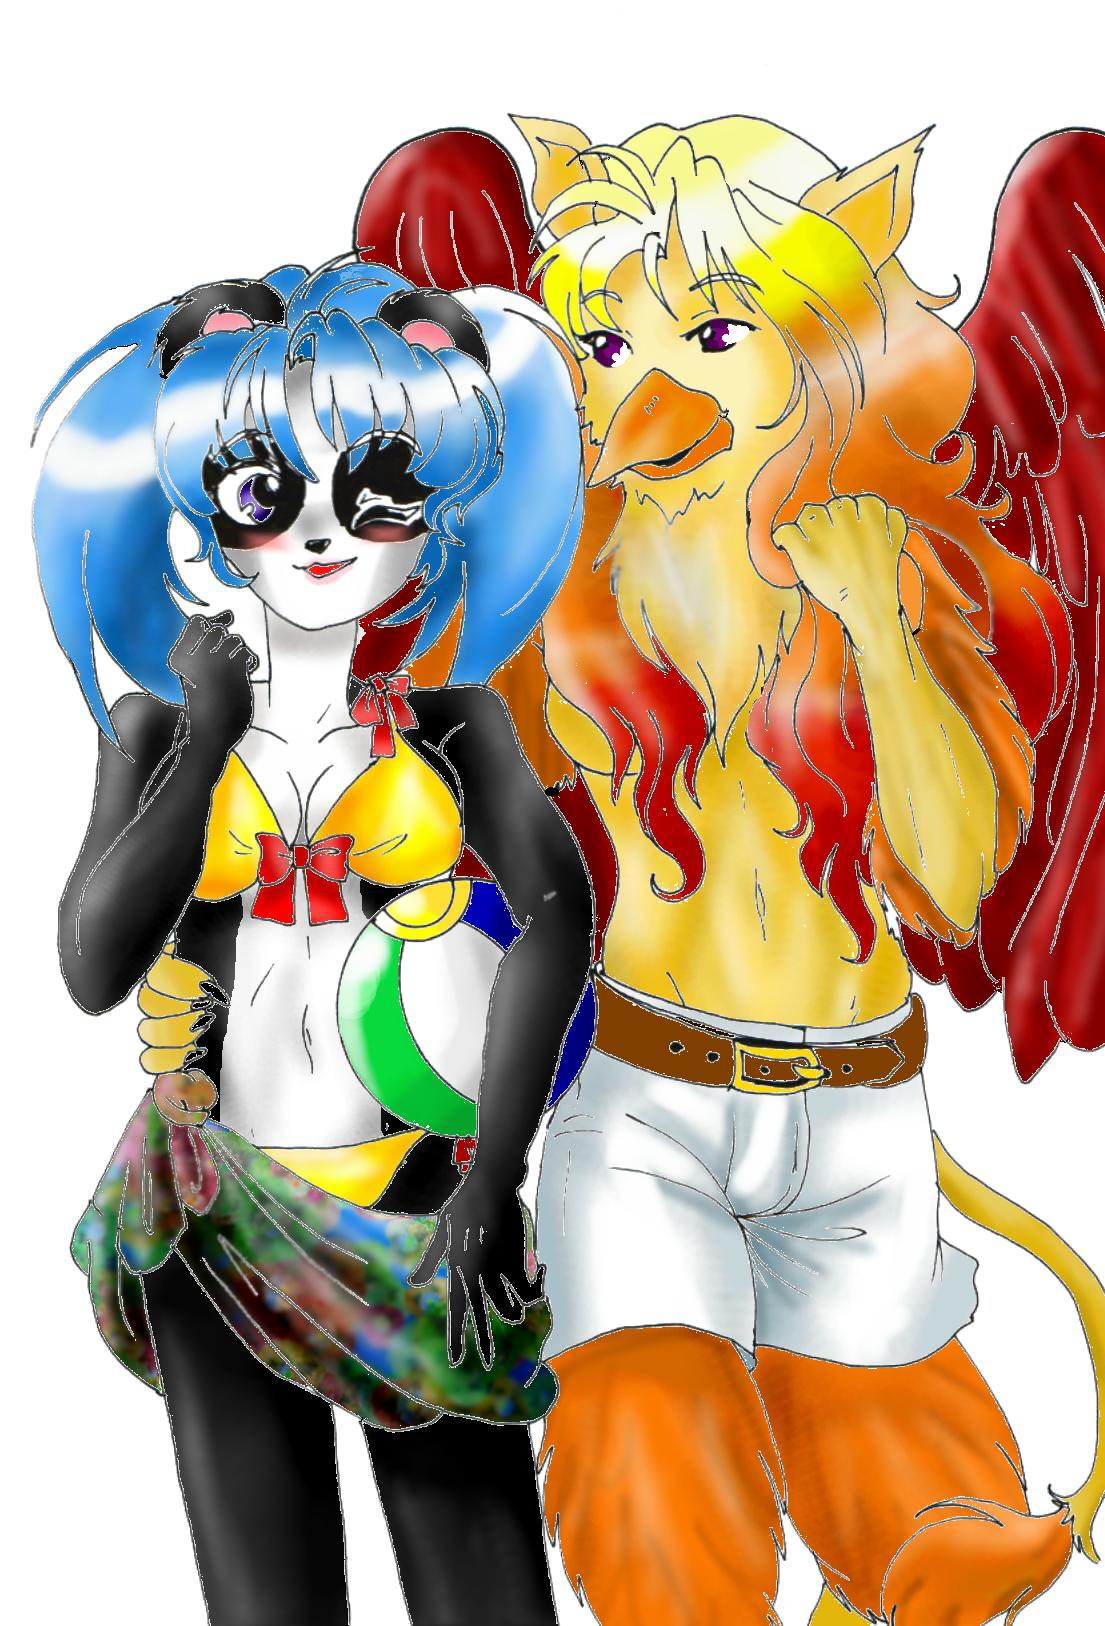 Panda and Griffin girls (coloured) by SerraRaven